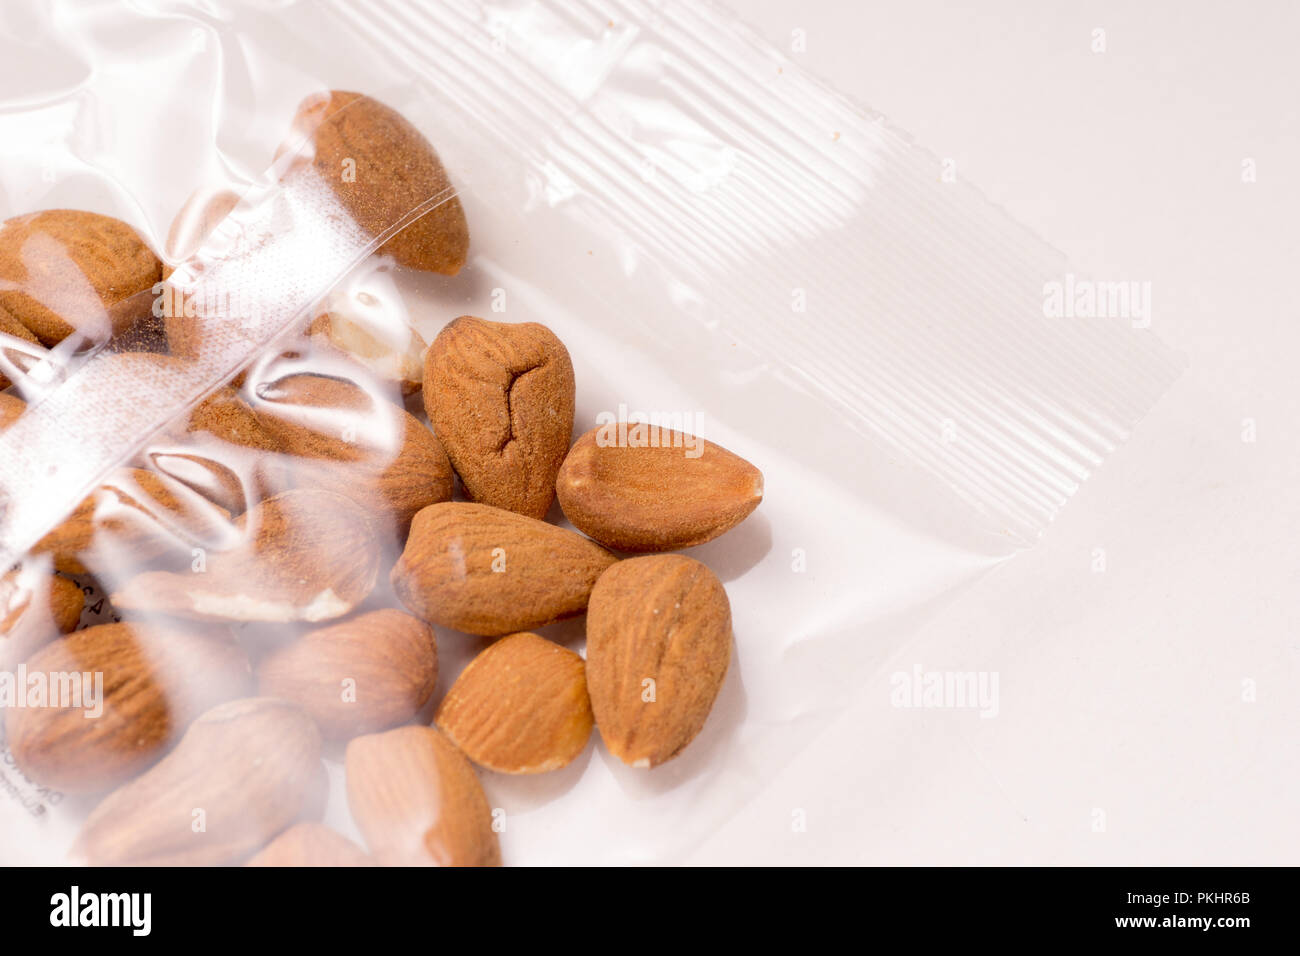 almonds packages in plastic packaging isoalted on white background Stock Photo